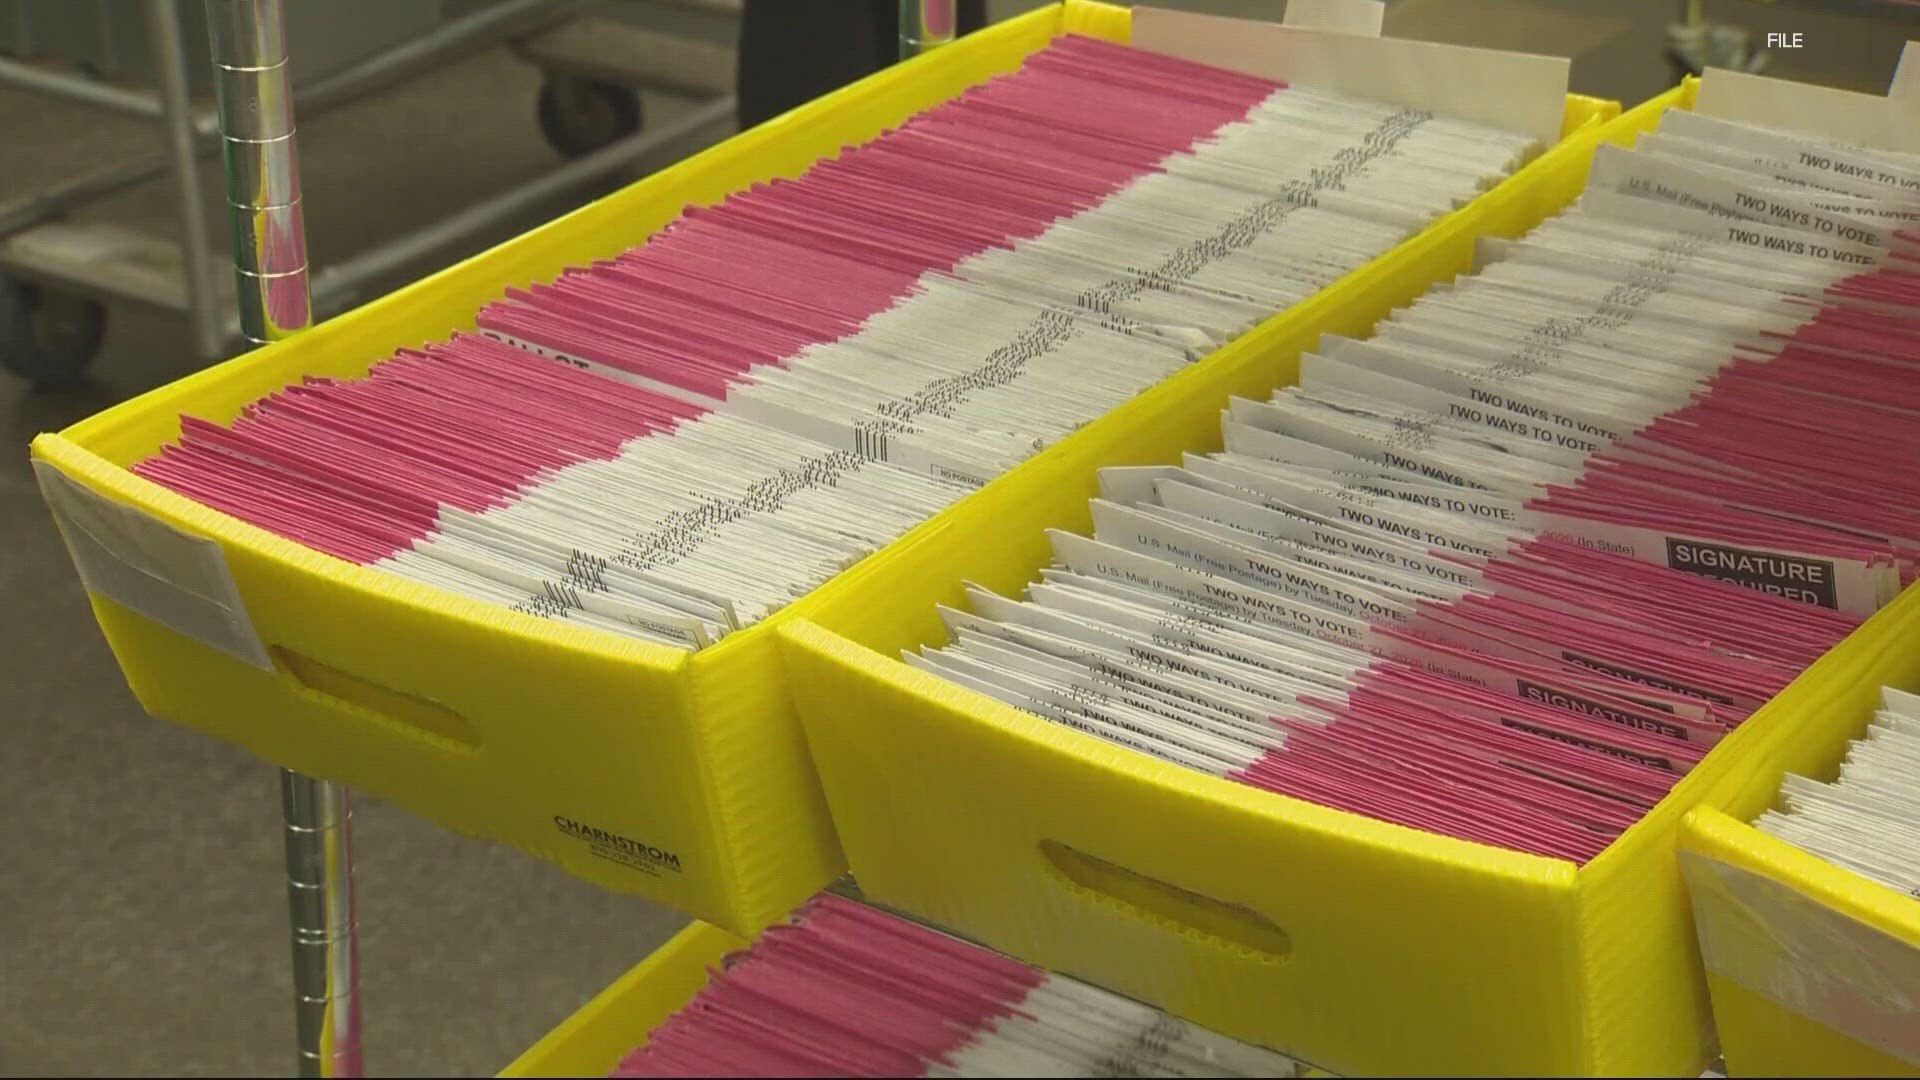 The Washington state's secretary of state tells KGW that the test results were accidentally published to their website last week.